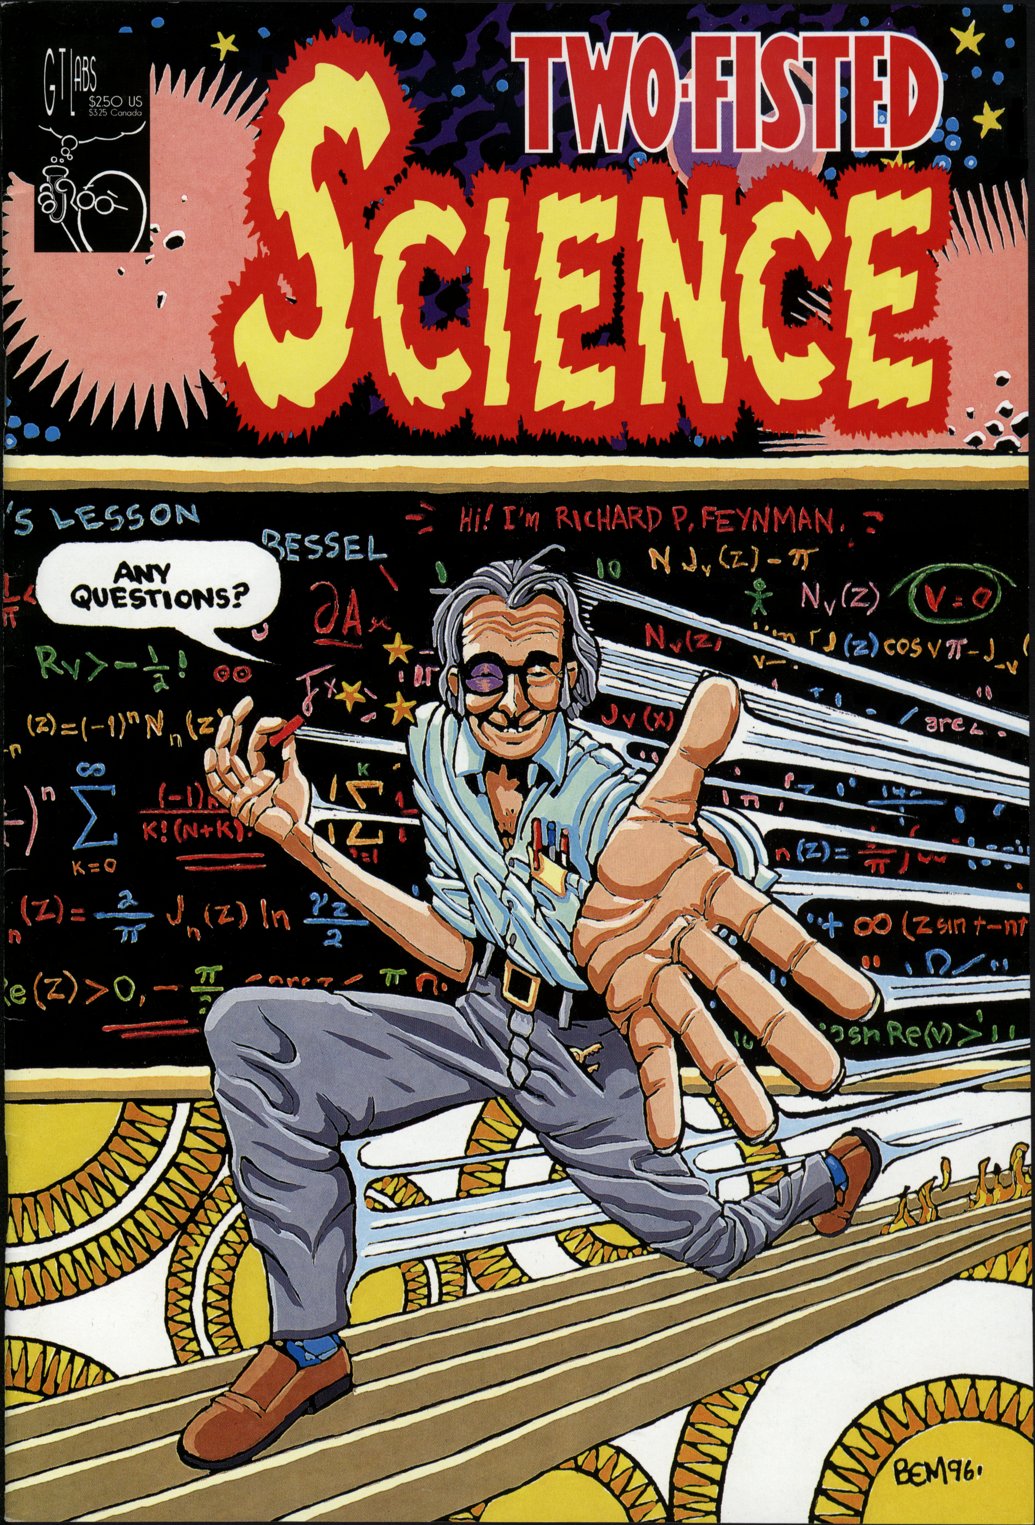 Read online Two-Fisted Science comic -  Issue # Full - 1